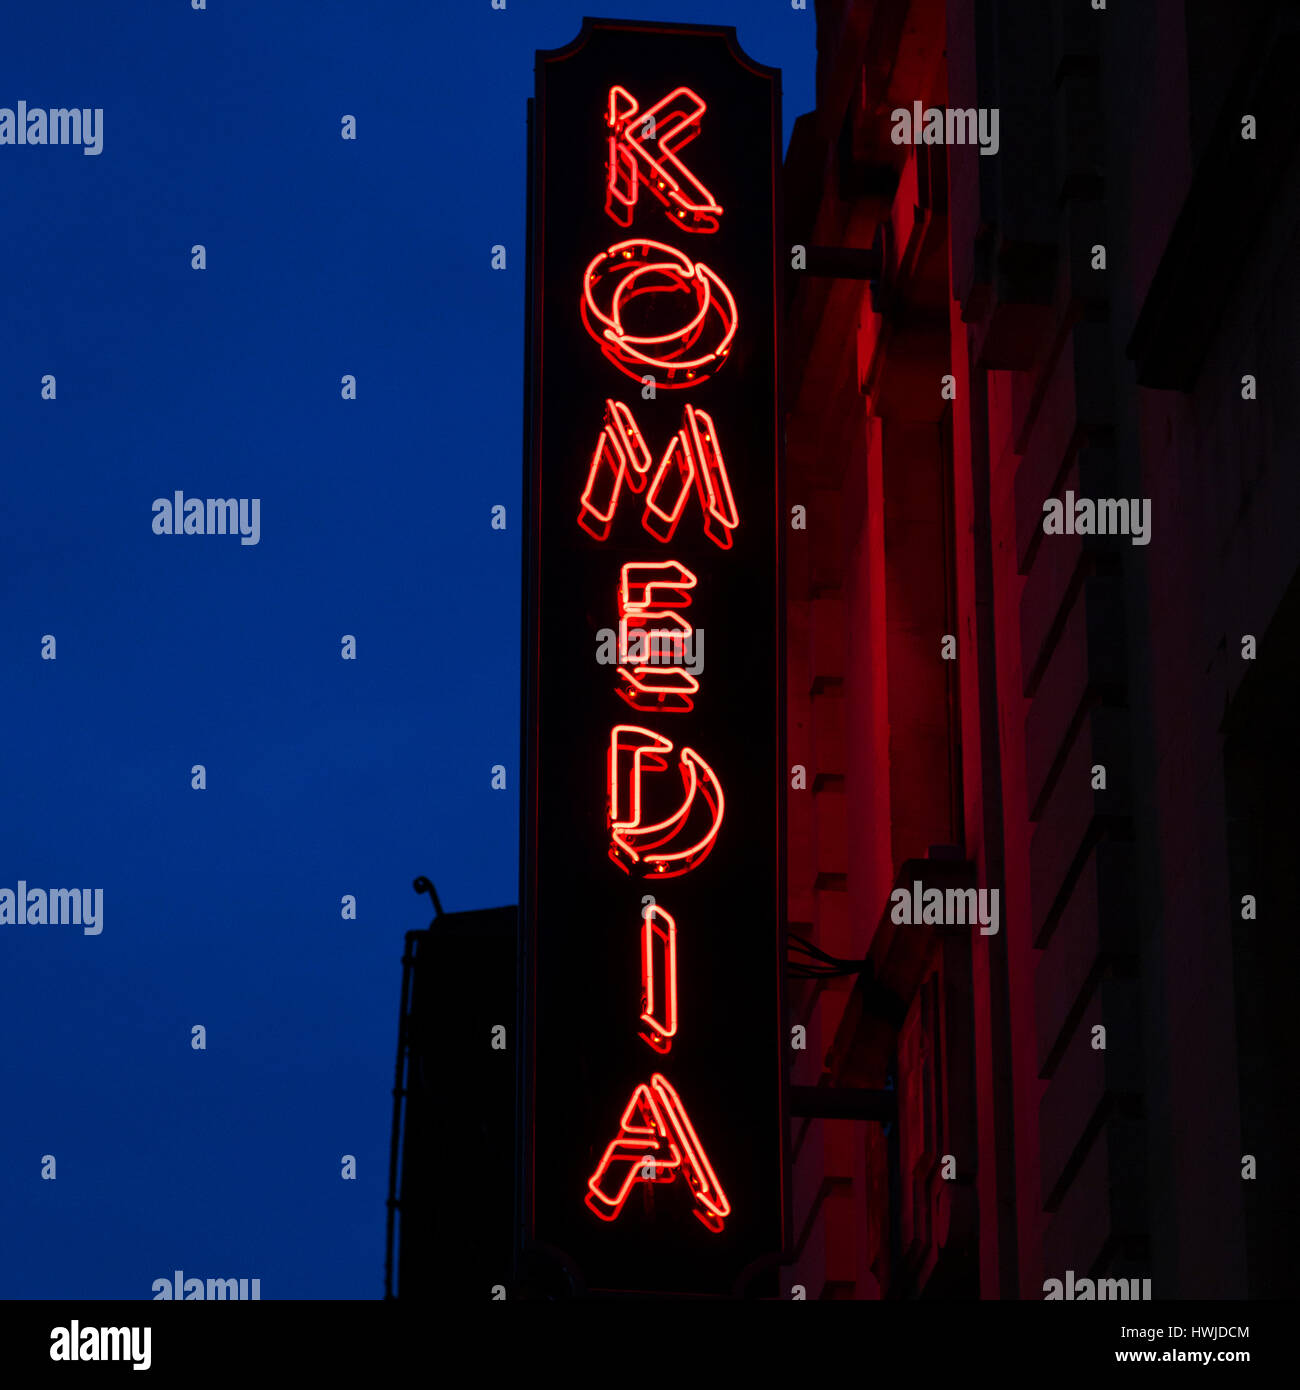 Neon sign for the Komedia in Bath, England. The venue stages comedy gigs and stand up shows. Stock Photo